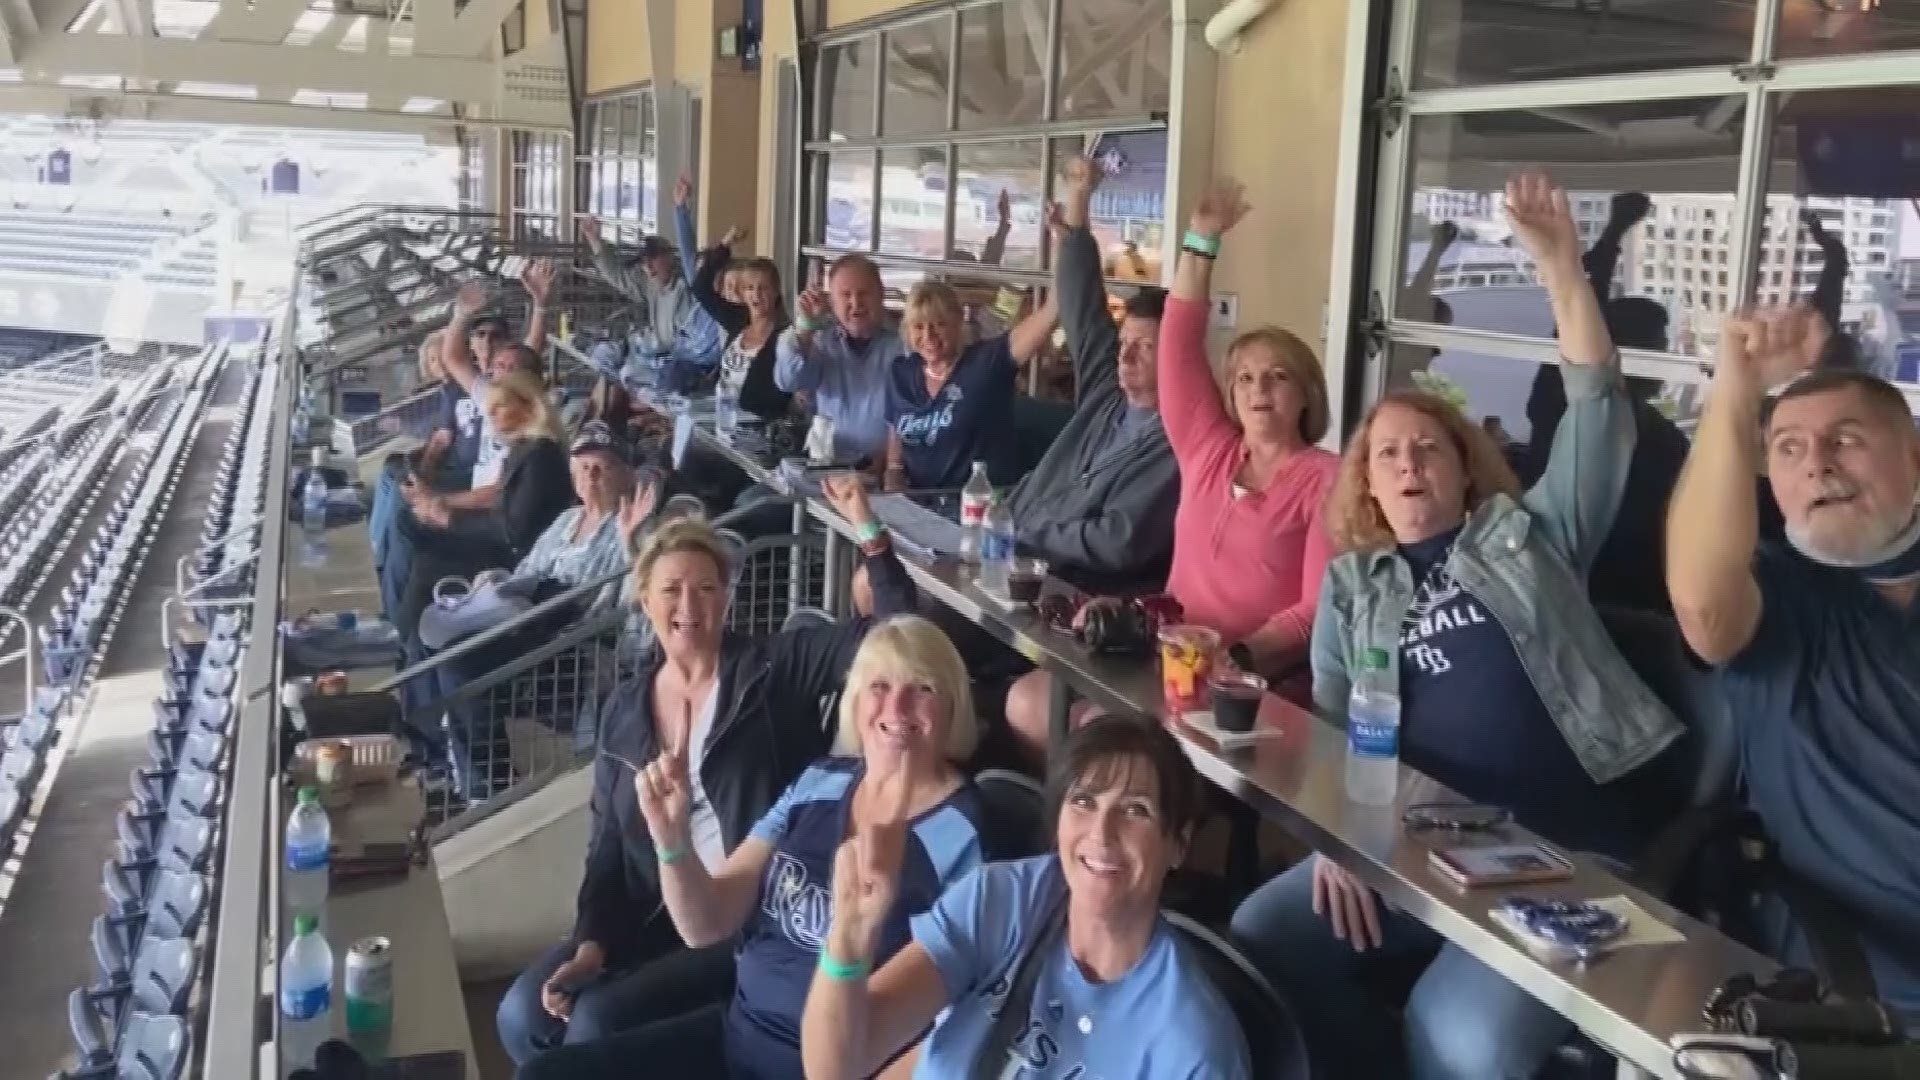 The Rays parents were all in one suite while the parents of the Yankees players were in another.